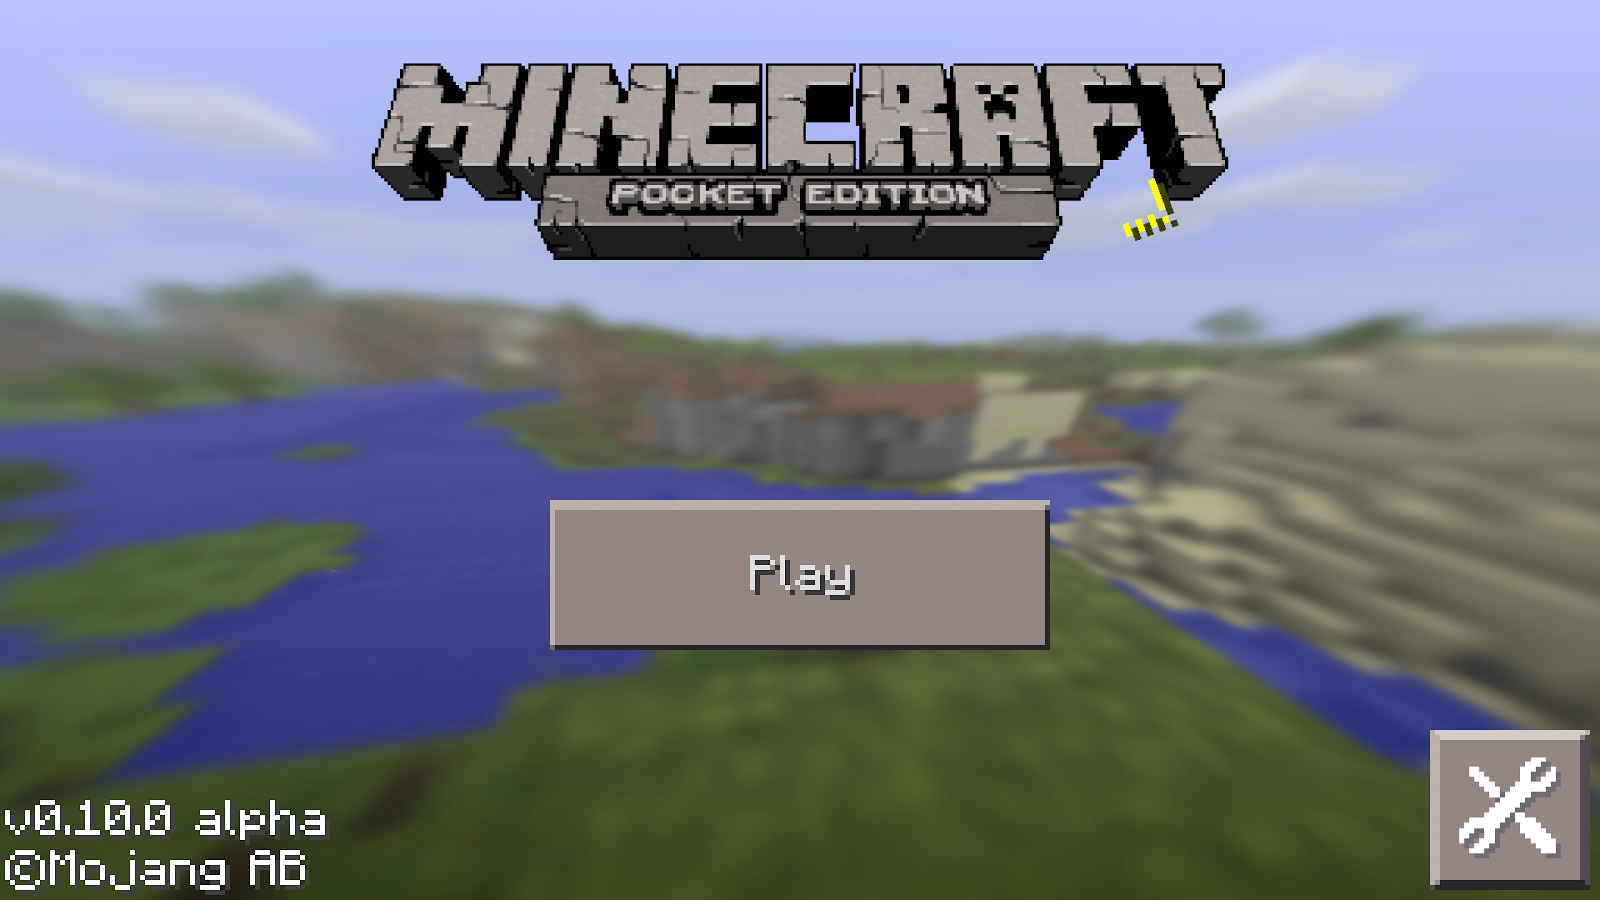 instal the new for windows Minecraft